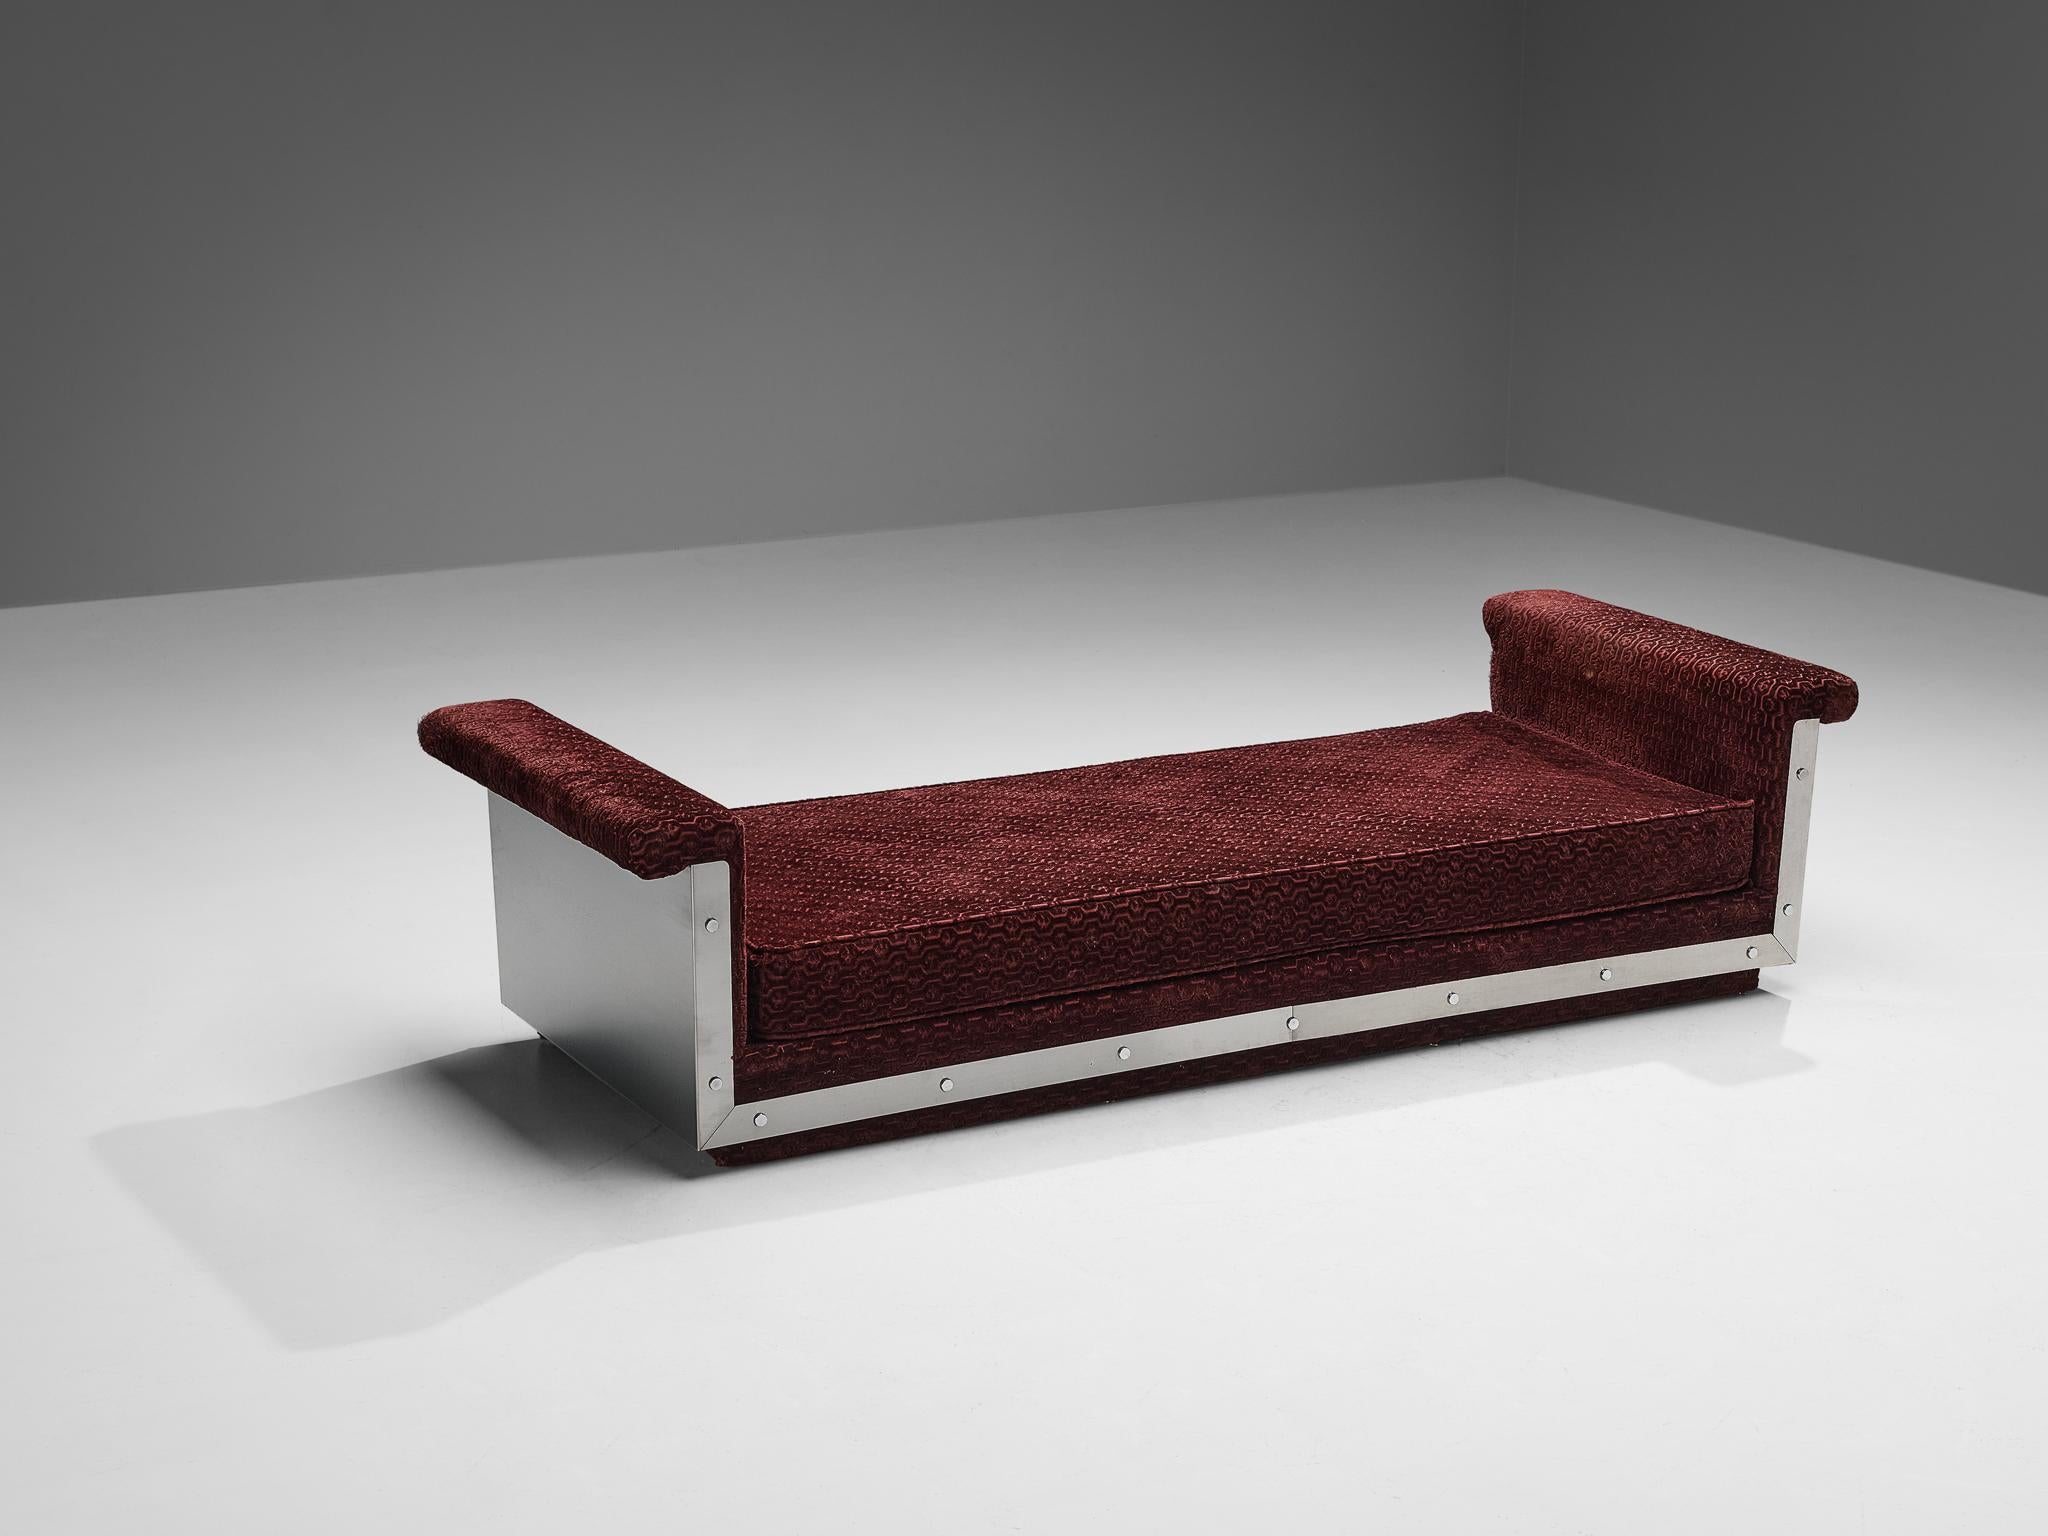 French Daybed in Stainless Steel and Burgundy Velvet Upholstery